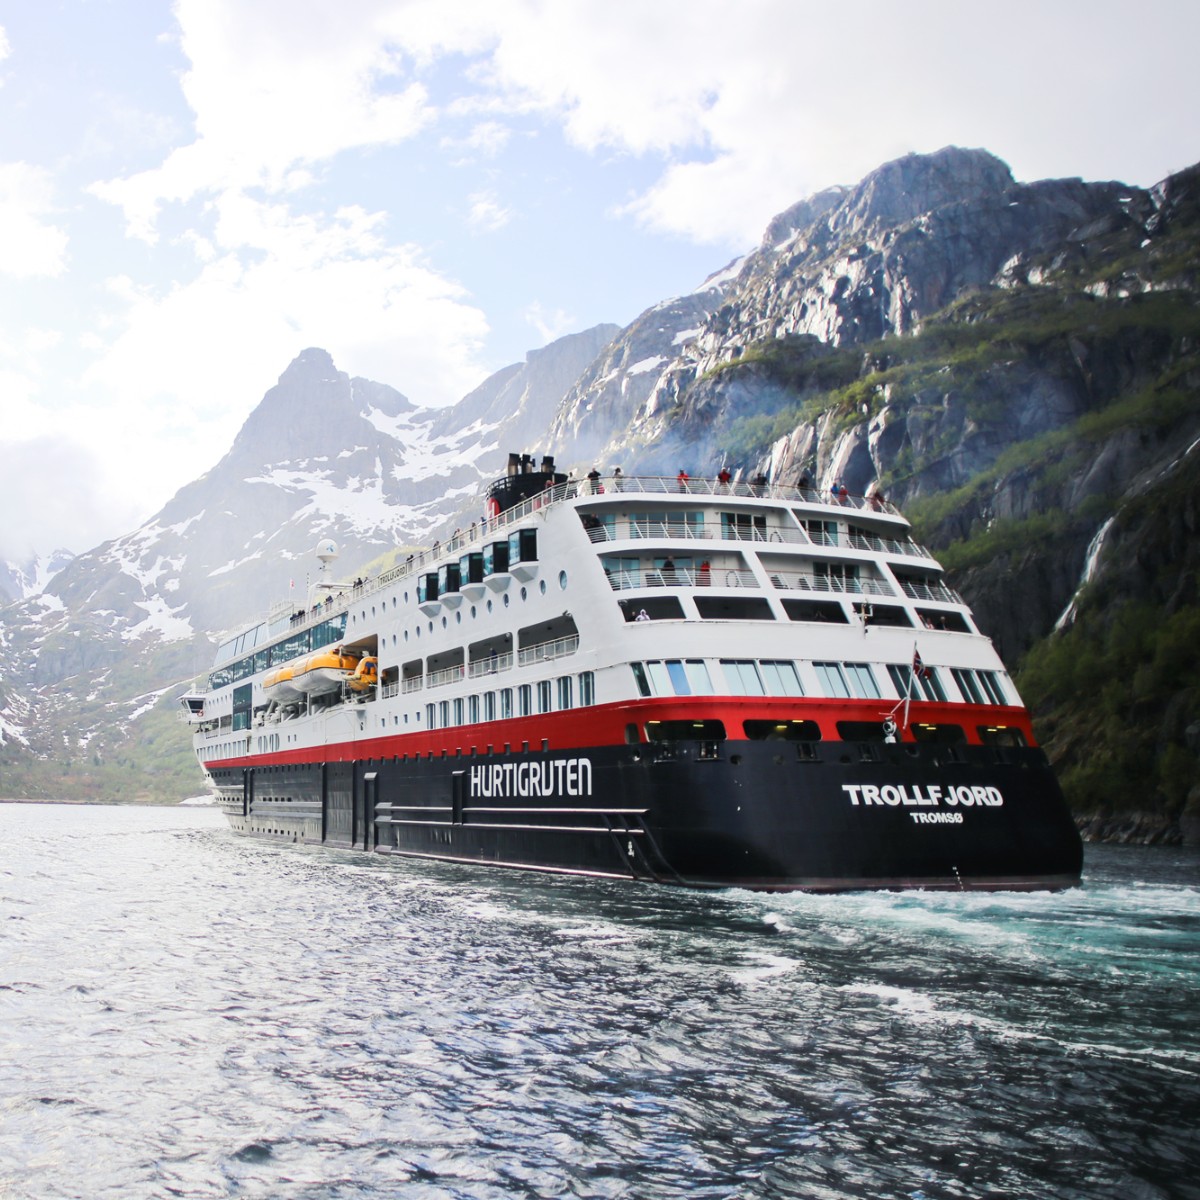 📢 BIG NEWS: As part of our 130-year anniversary, Hurtigruten Norway is launching two new voyages🇳🇴 One revived from history, the other poised to make history. Read more here: press.hurtigruten.com/pressreleases/…